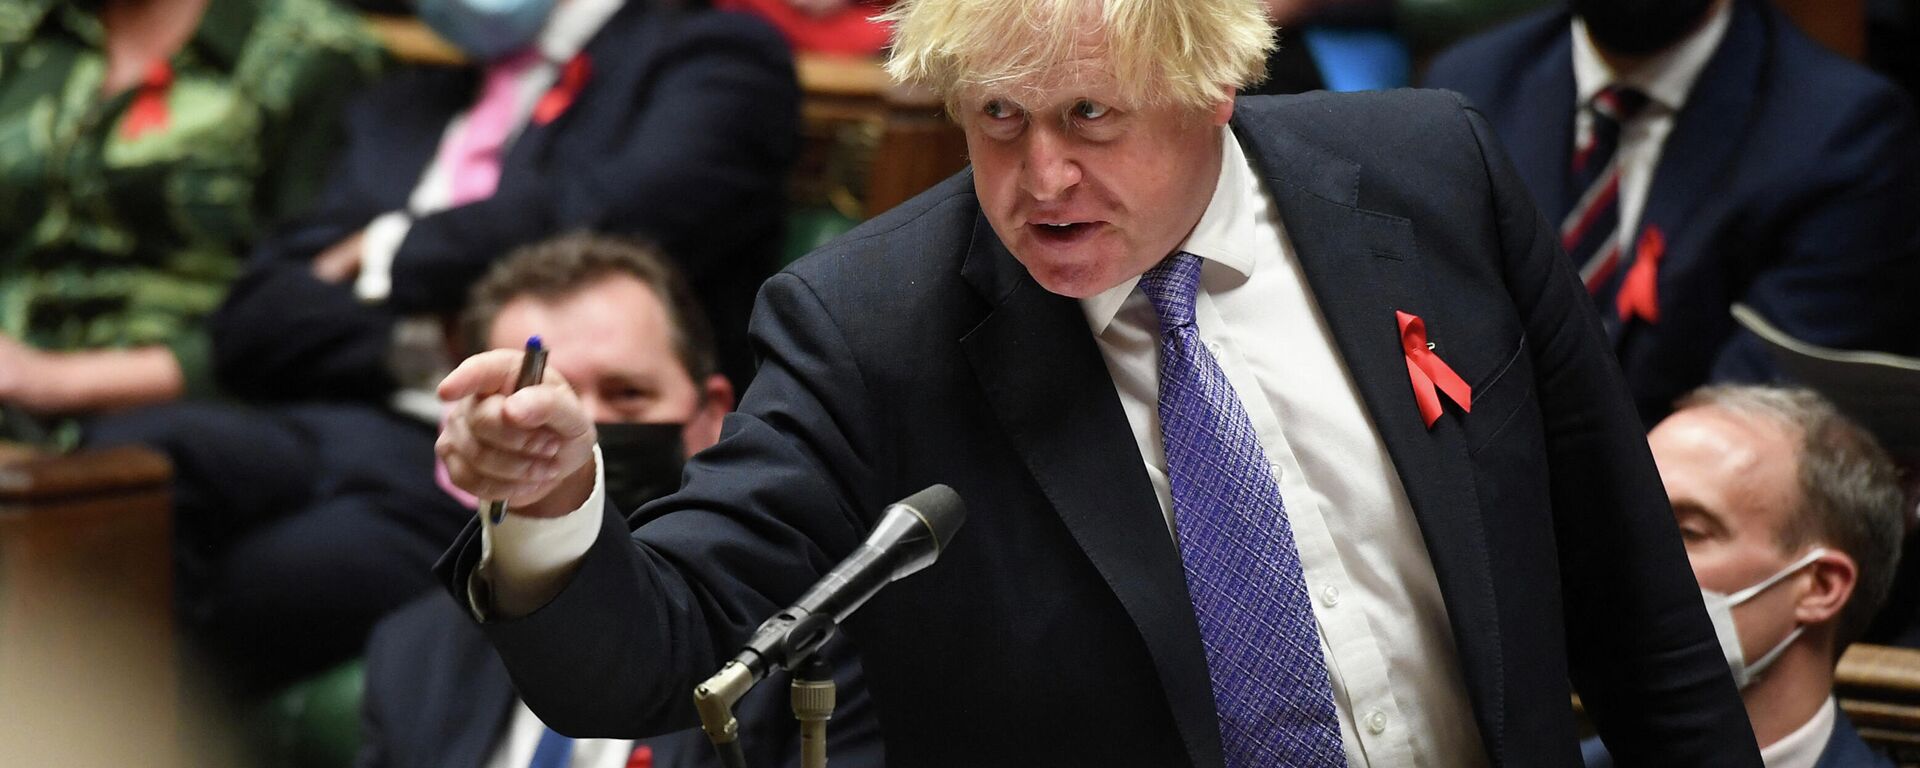 A handout photograph released by the UK Parliament shows Britain's Prime Minister Boris Johnson gesturing as he speaks during Prime Minister's Questions (PMQs) in the House of Commons in London on December 1, 2021 - Sputnik International, 1920, 17.12.2021